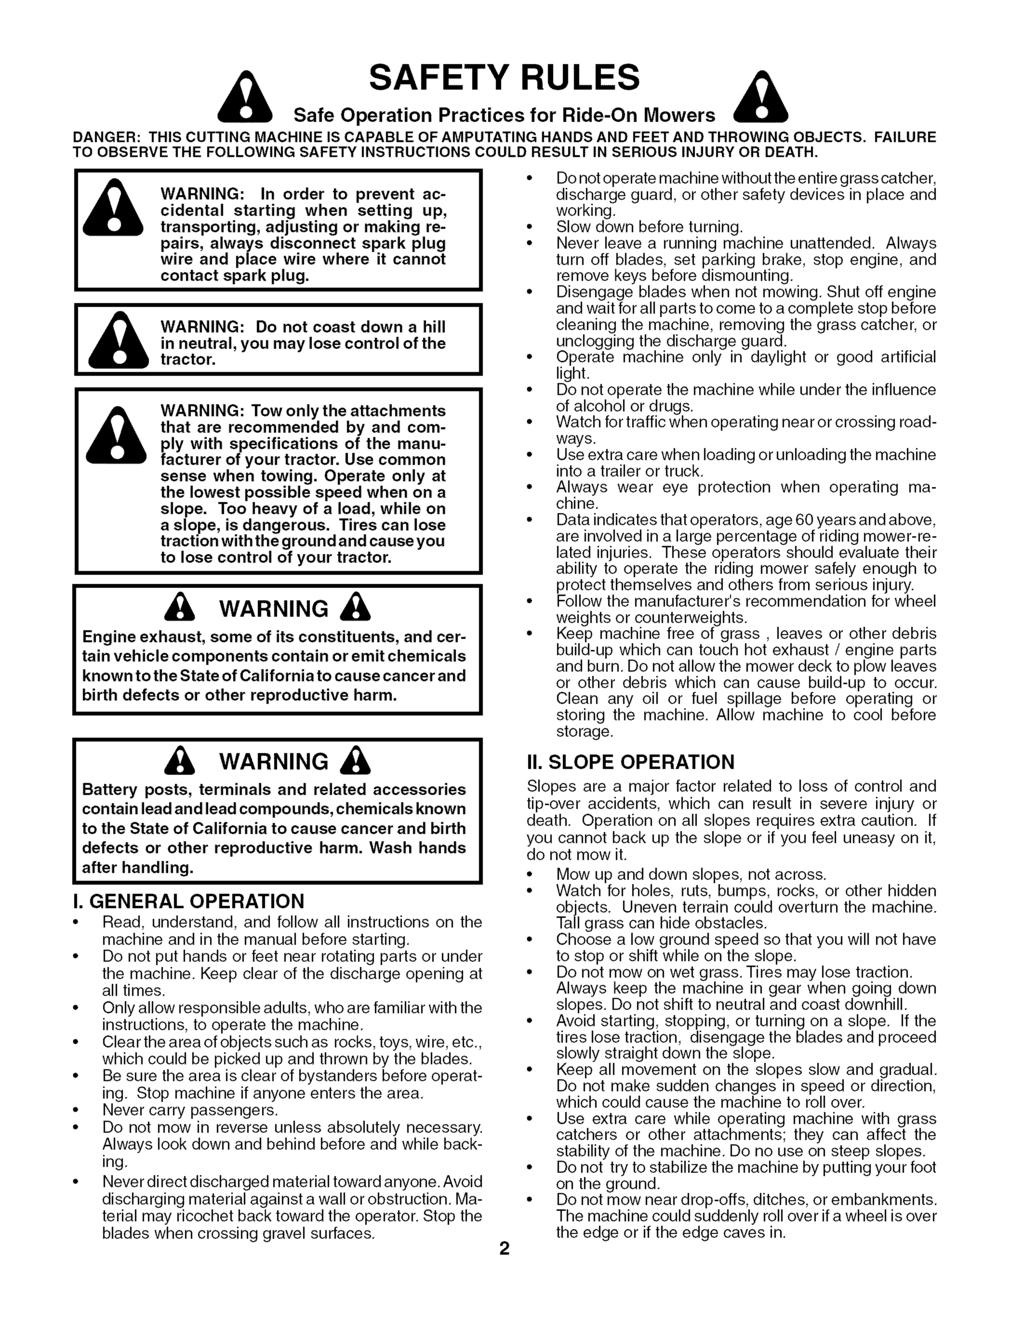 SAFETY RULES & Safe Operation Practices for Ride-On Mowers DANGER: THIS CUTTING MACHINE IS CAPABLE OF AMPUTATINGHANDS AND FEETAND THROWING OBJECTS.